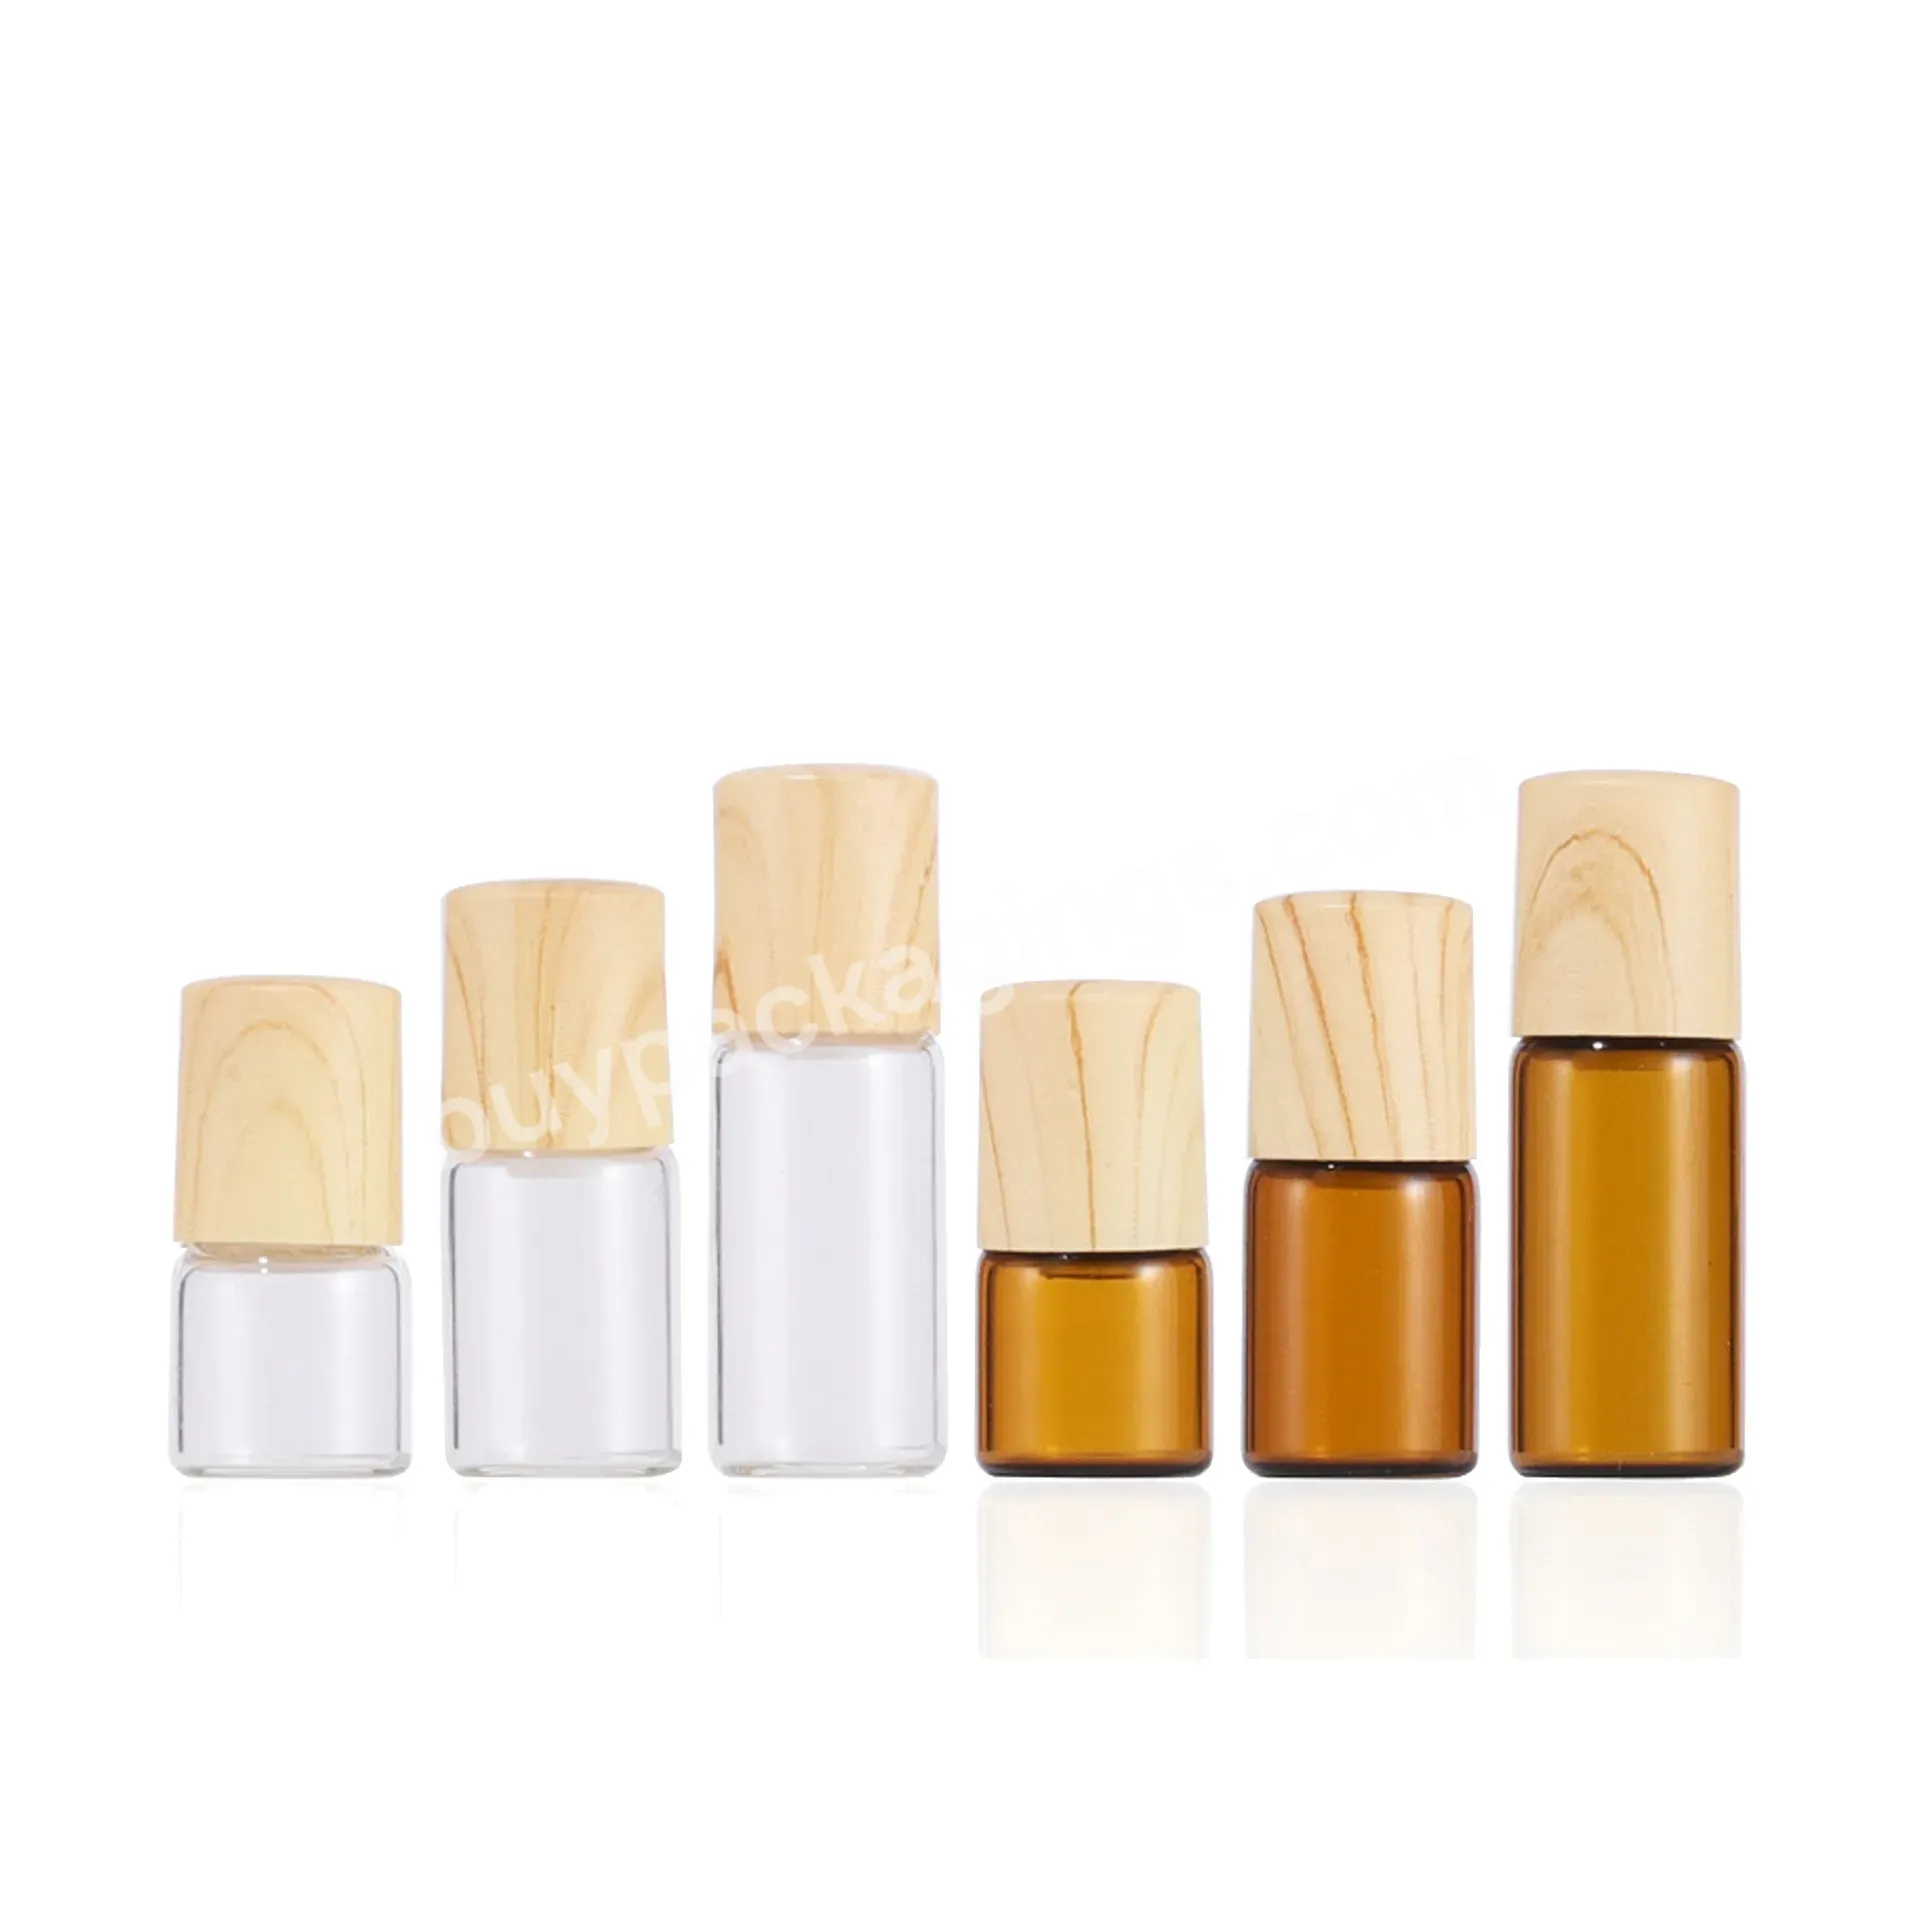 1ml 2ml 3ml Amber Thin Glass Roll On Bottle Sample Test Essential Oil Perfume Clear Vials With Roller Metal Ball - Buy Glass Roll On Bottle 3ml Amber,Essential Oil Bottle Roll On Brown 2ml,Essential Oil Bottle Roller 2ml Amber.